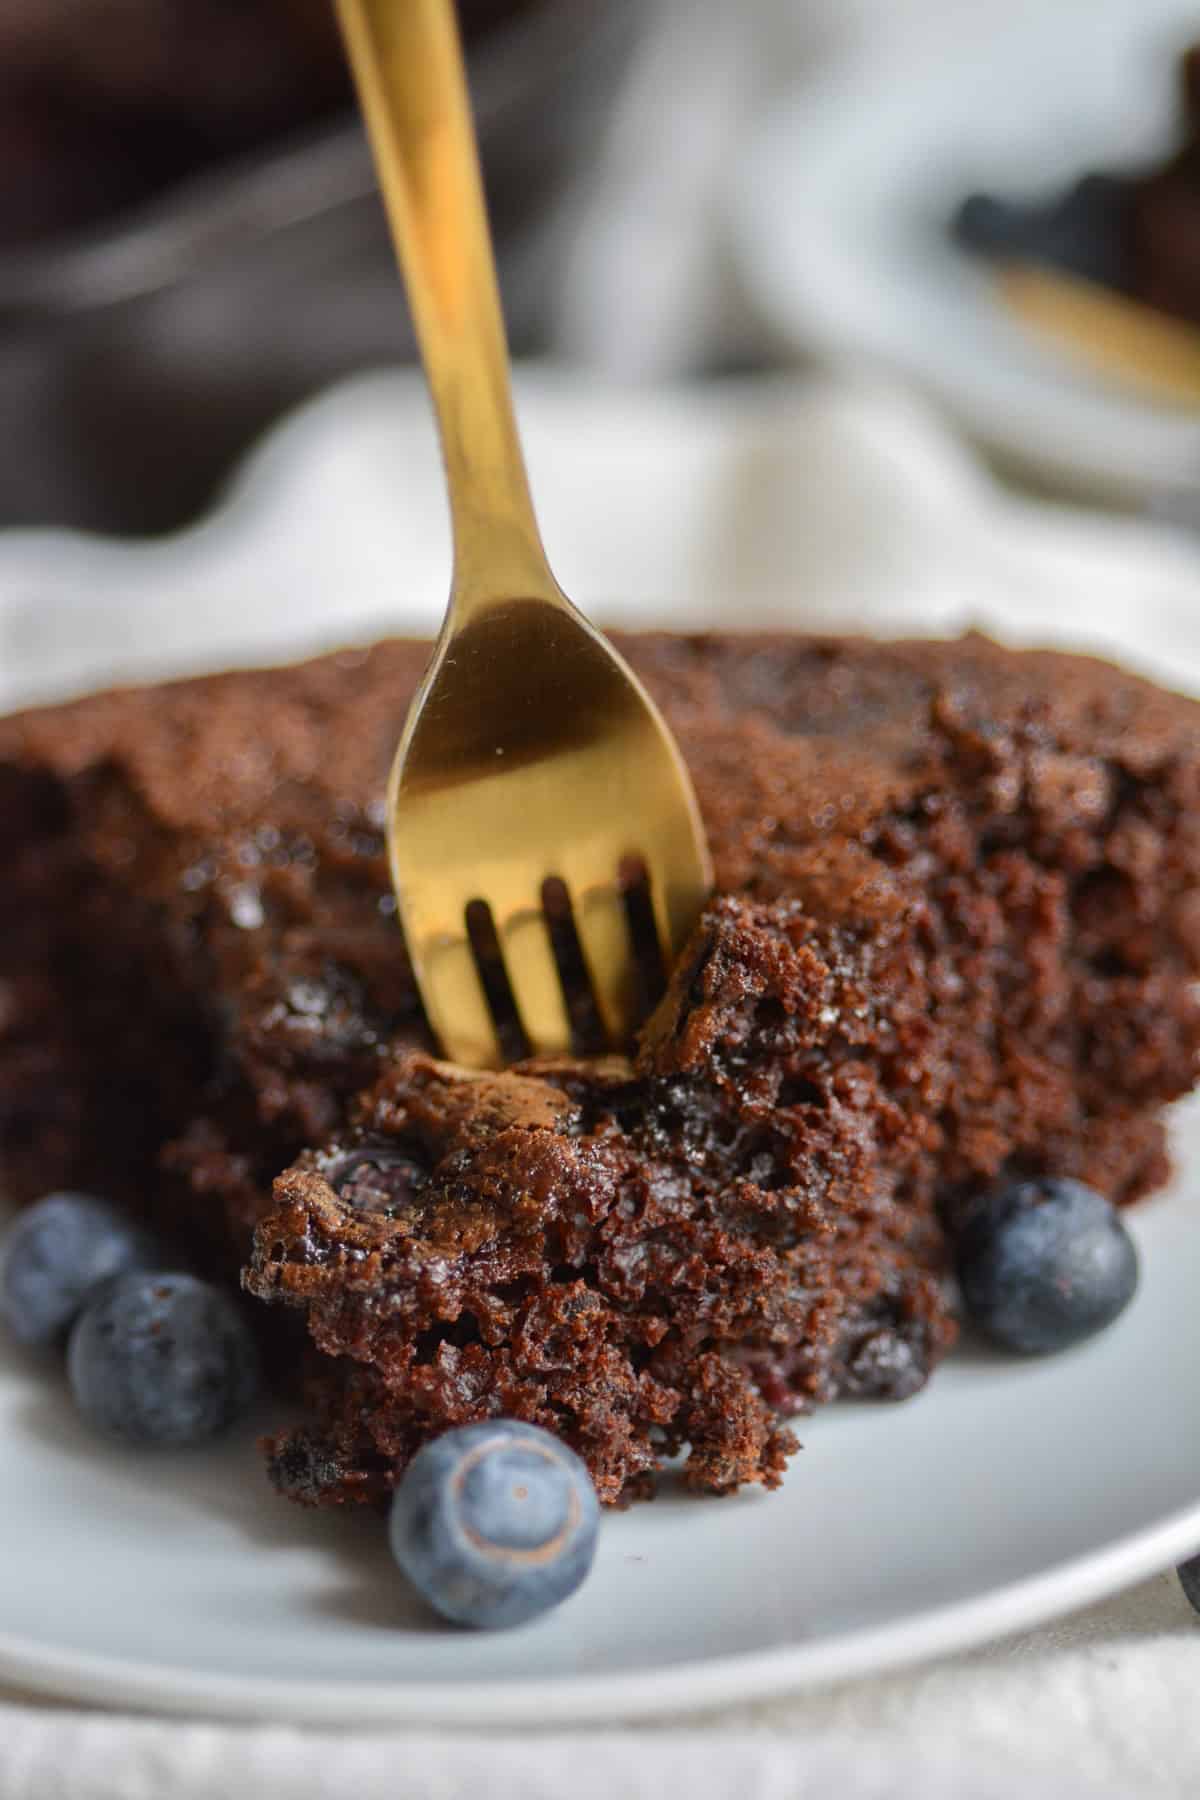 Fork in a piece of vegan chocolate blueberry cake